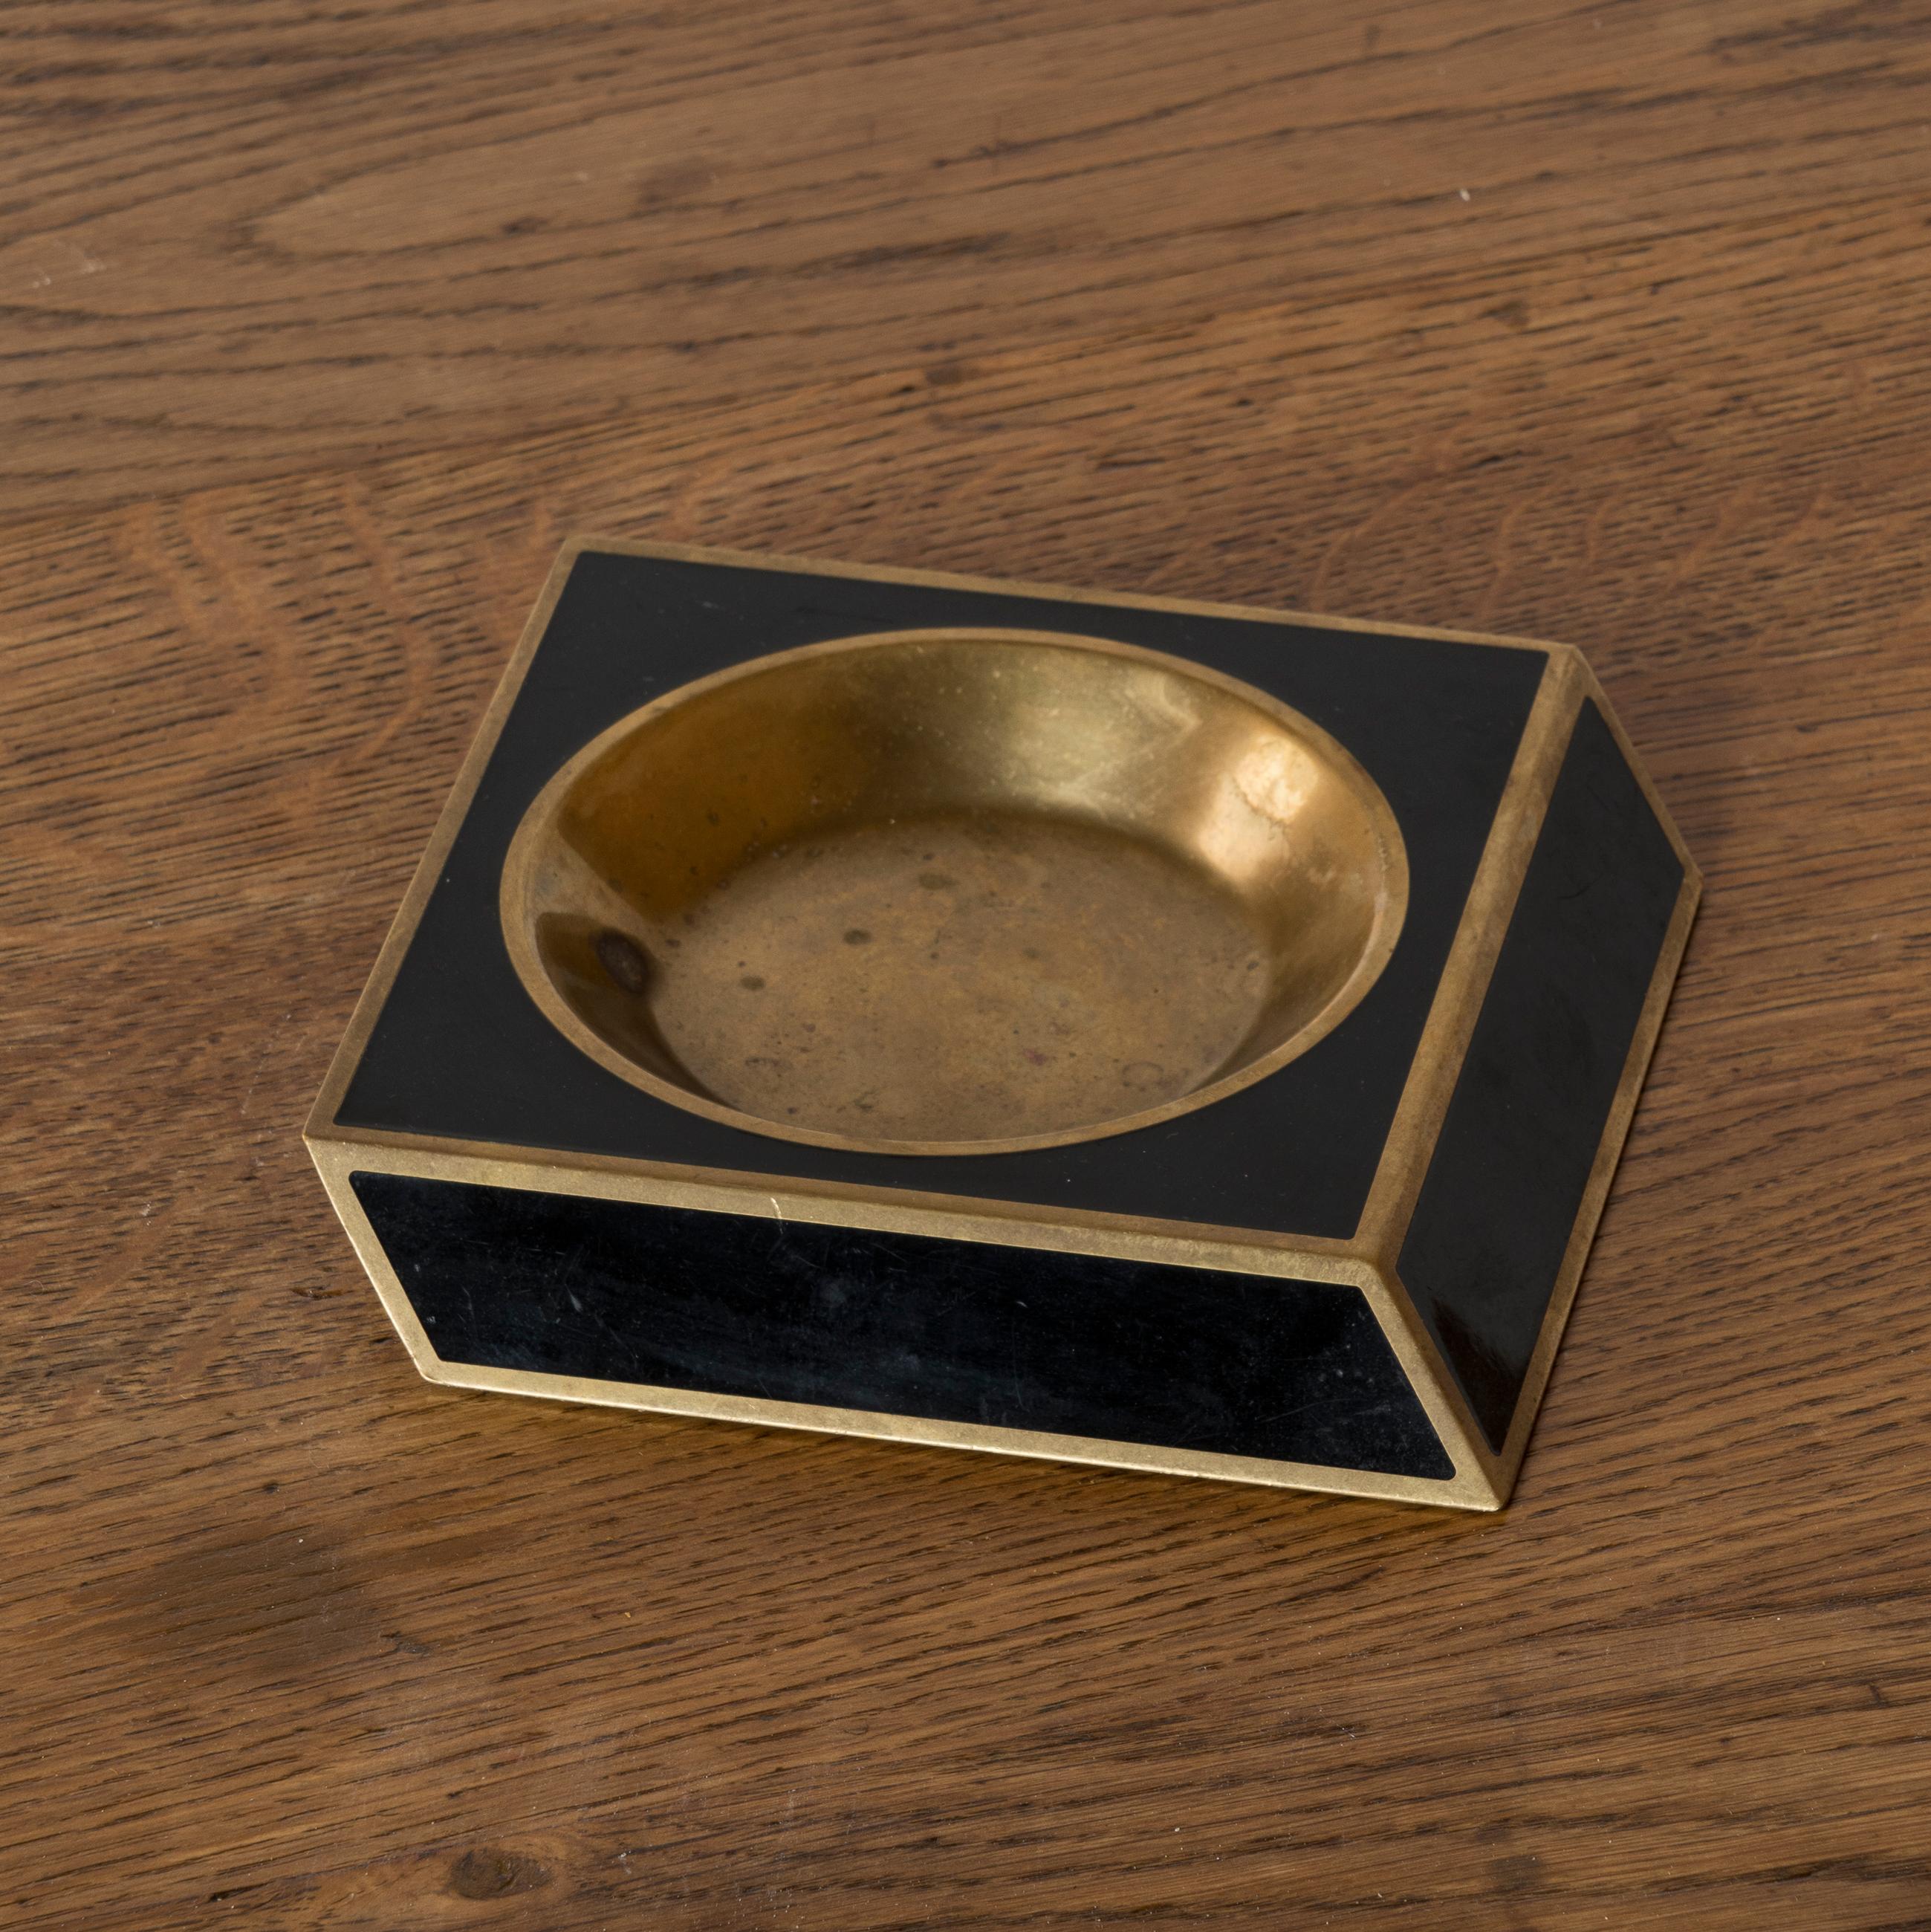 Unique sculptural square bronze container with tilted black enamel sides. In good vintage condition. Very heavy.
This vide-poches will ship from France and can be returned to either France or to a LIC NY location.
Price does not include shipping nor